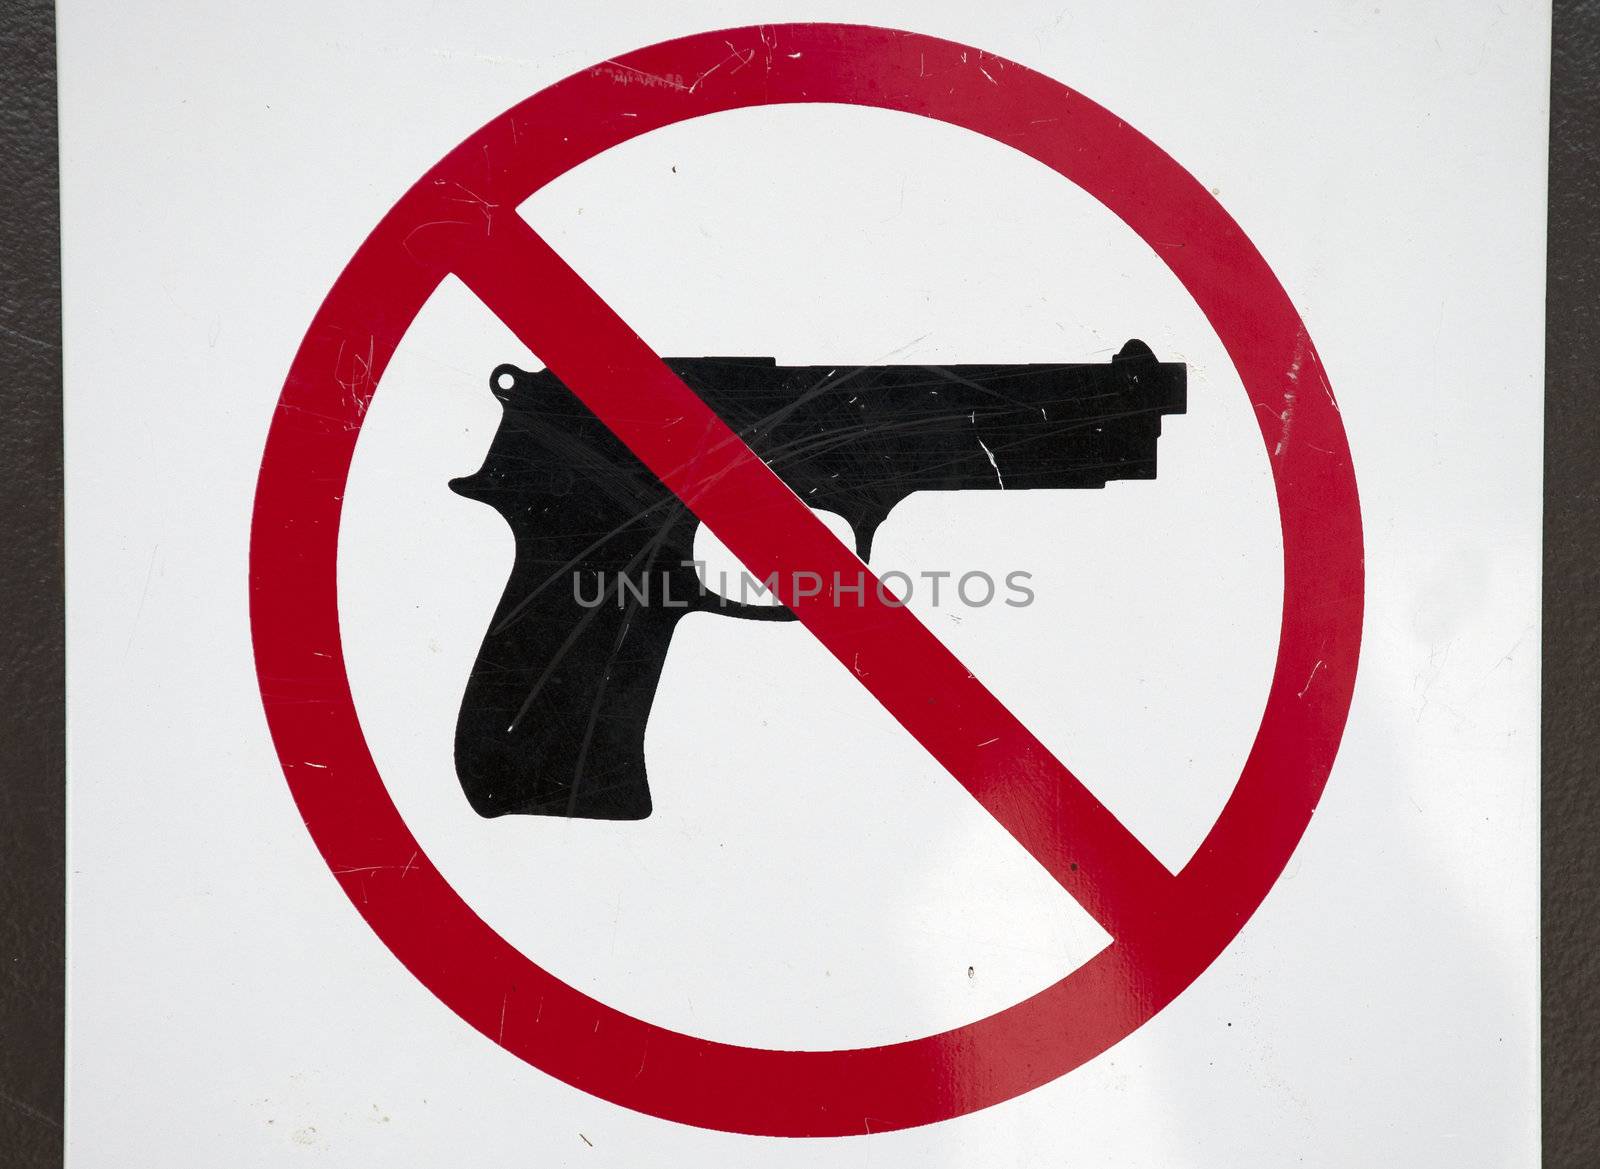 No Firearms by PDImages